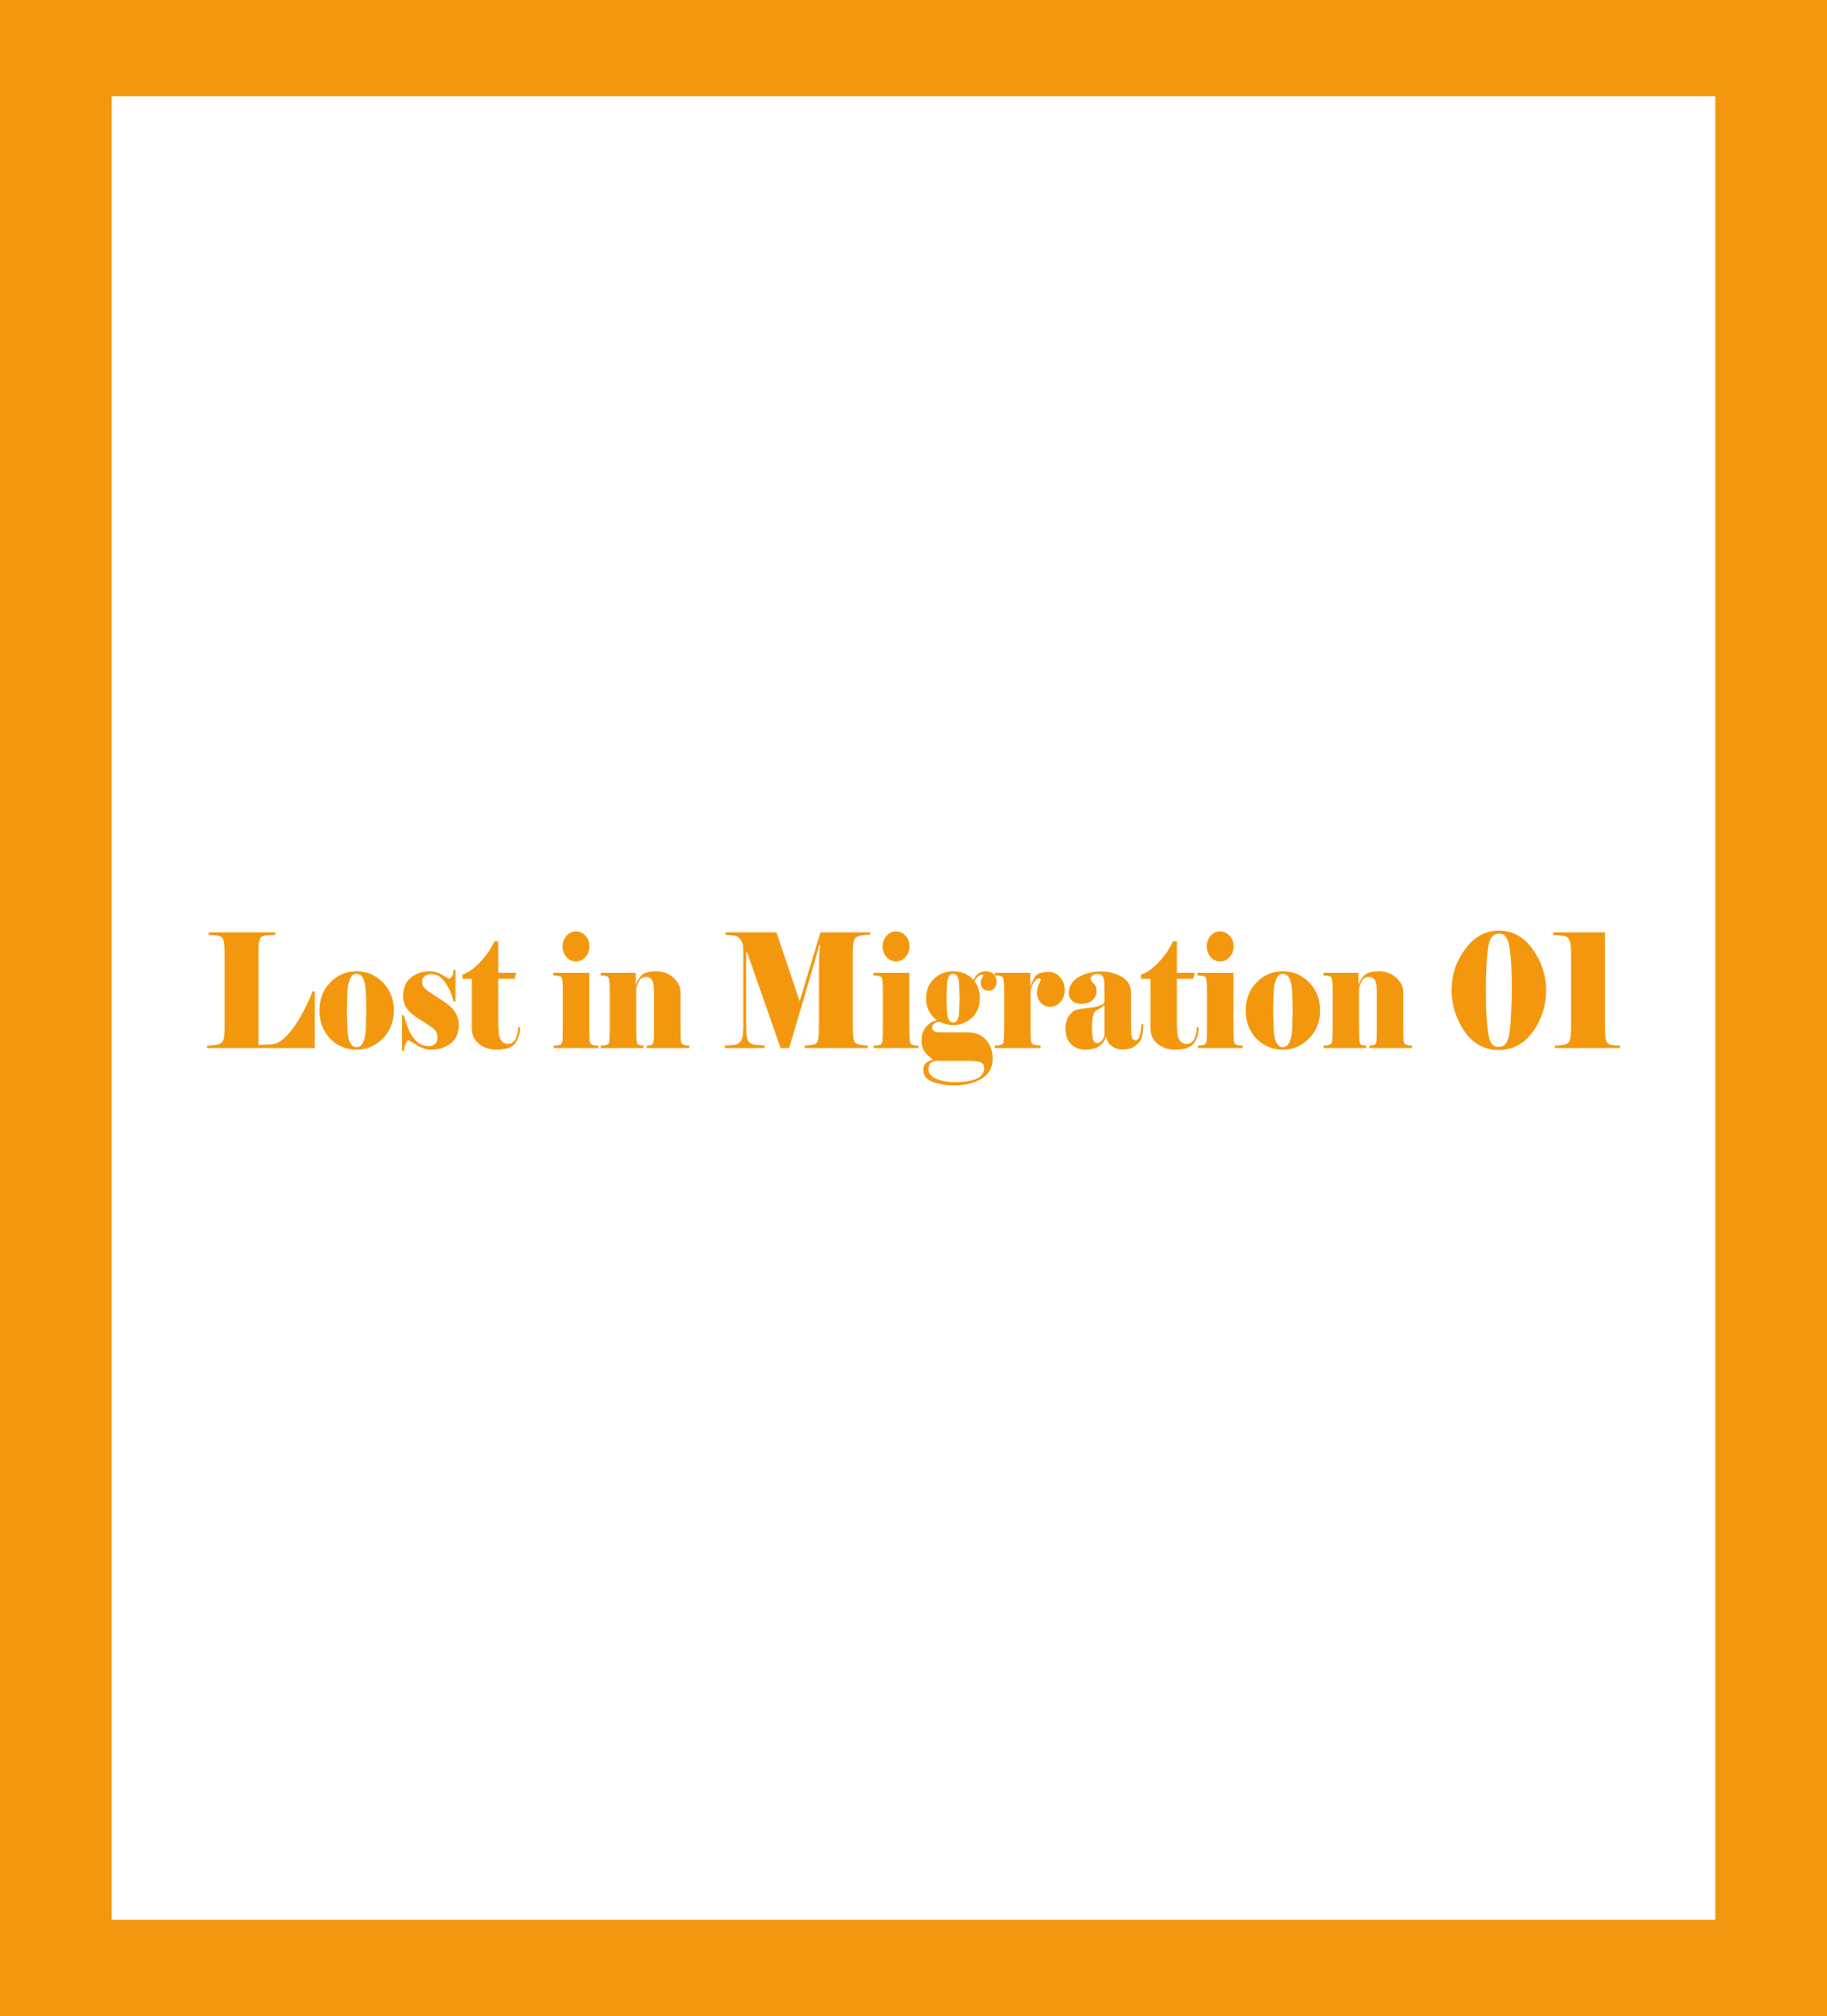 Lost in Migration 01